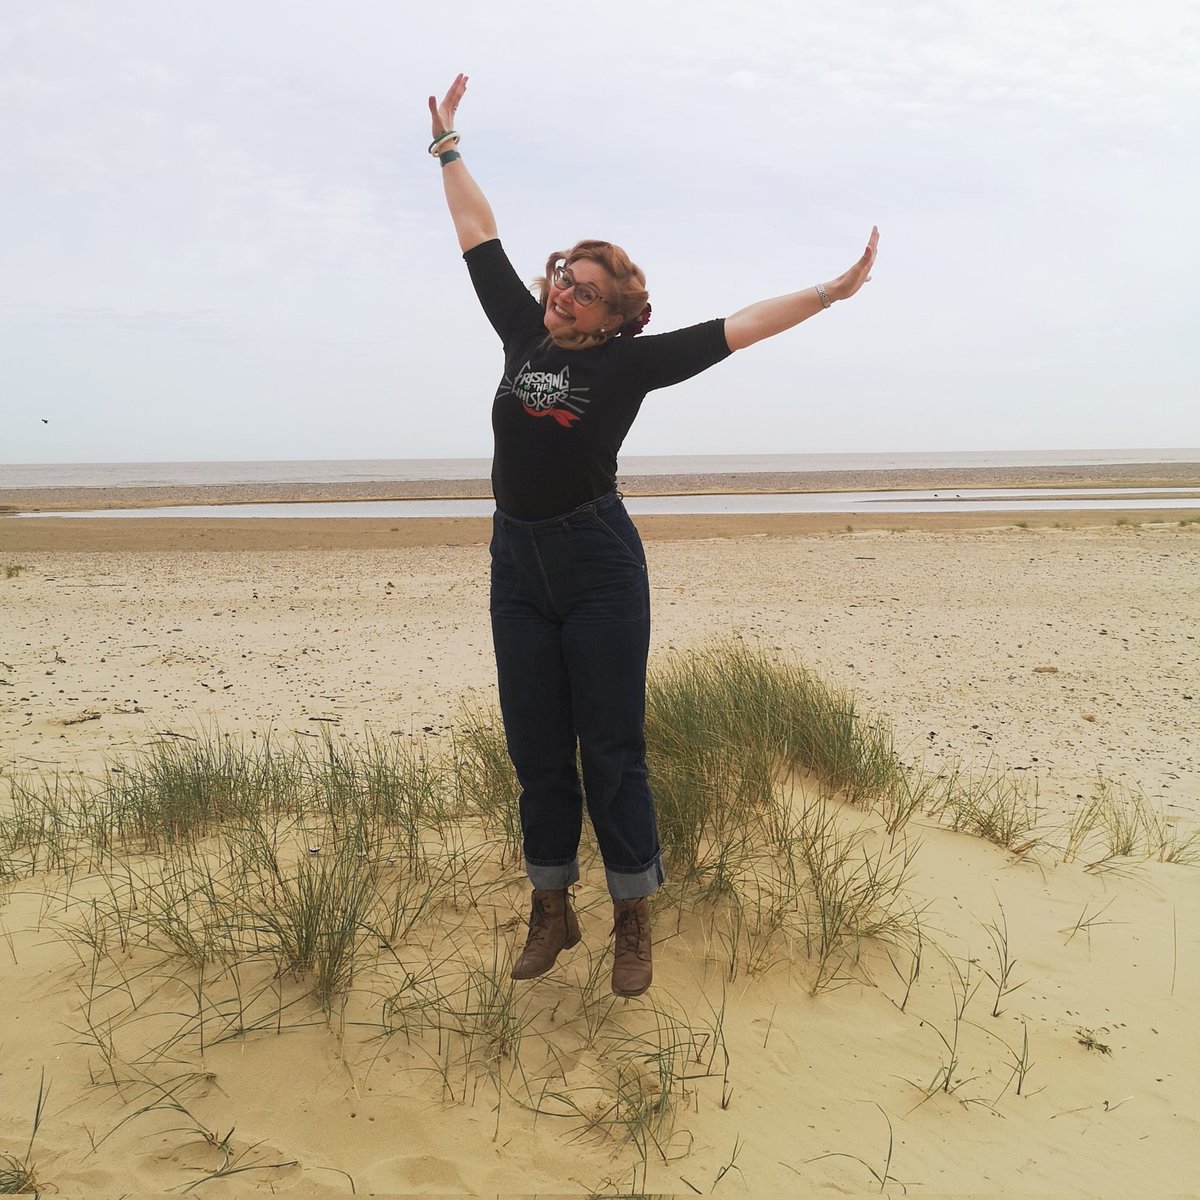 I am not on Pakefield beach. It is not ten days ago. I am definitely not as warm as I was in this picture. But I have just submitted 122,782 words of third-draft edits so actually, as feelings go, I'd say this photo has it down to a T 😉 #amwriting